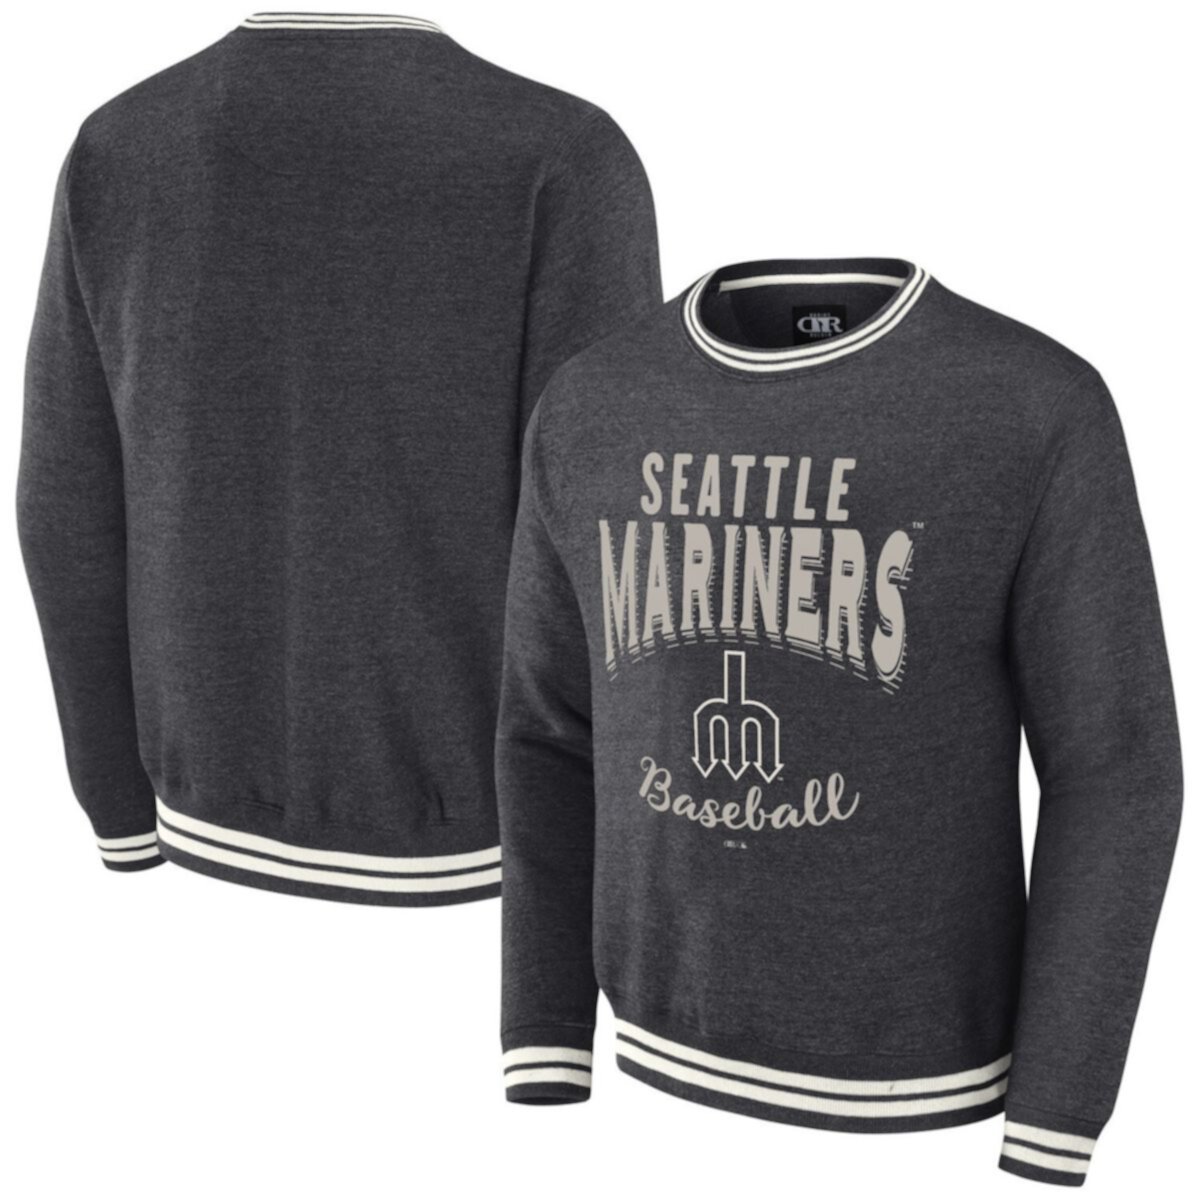 Men's Darius Rucker Collection by Fanatics  Heather Charcoal Seattle Mariners Vintage Pullover Sweatshirt Darius Rucker Collection by Fanatics